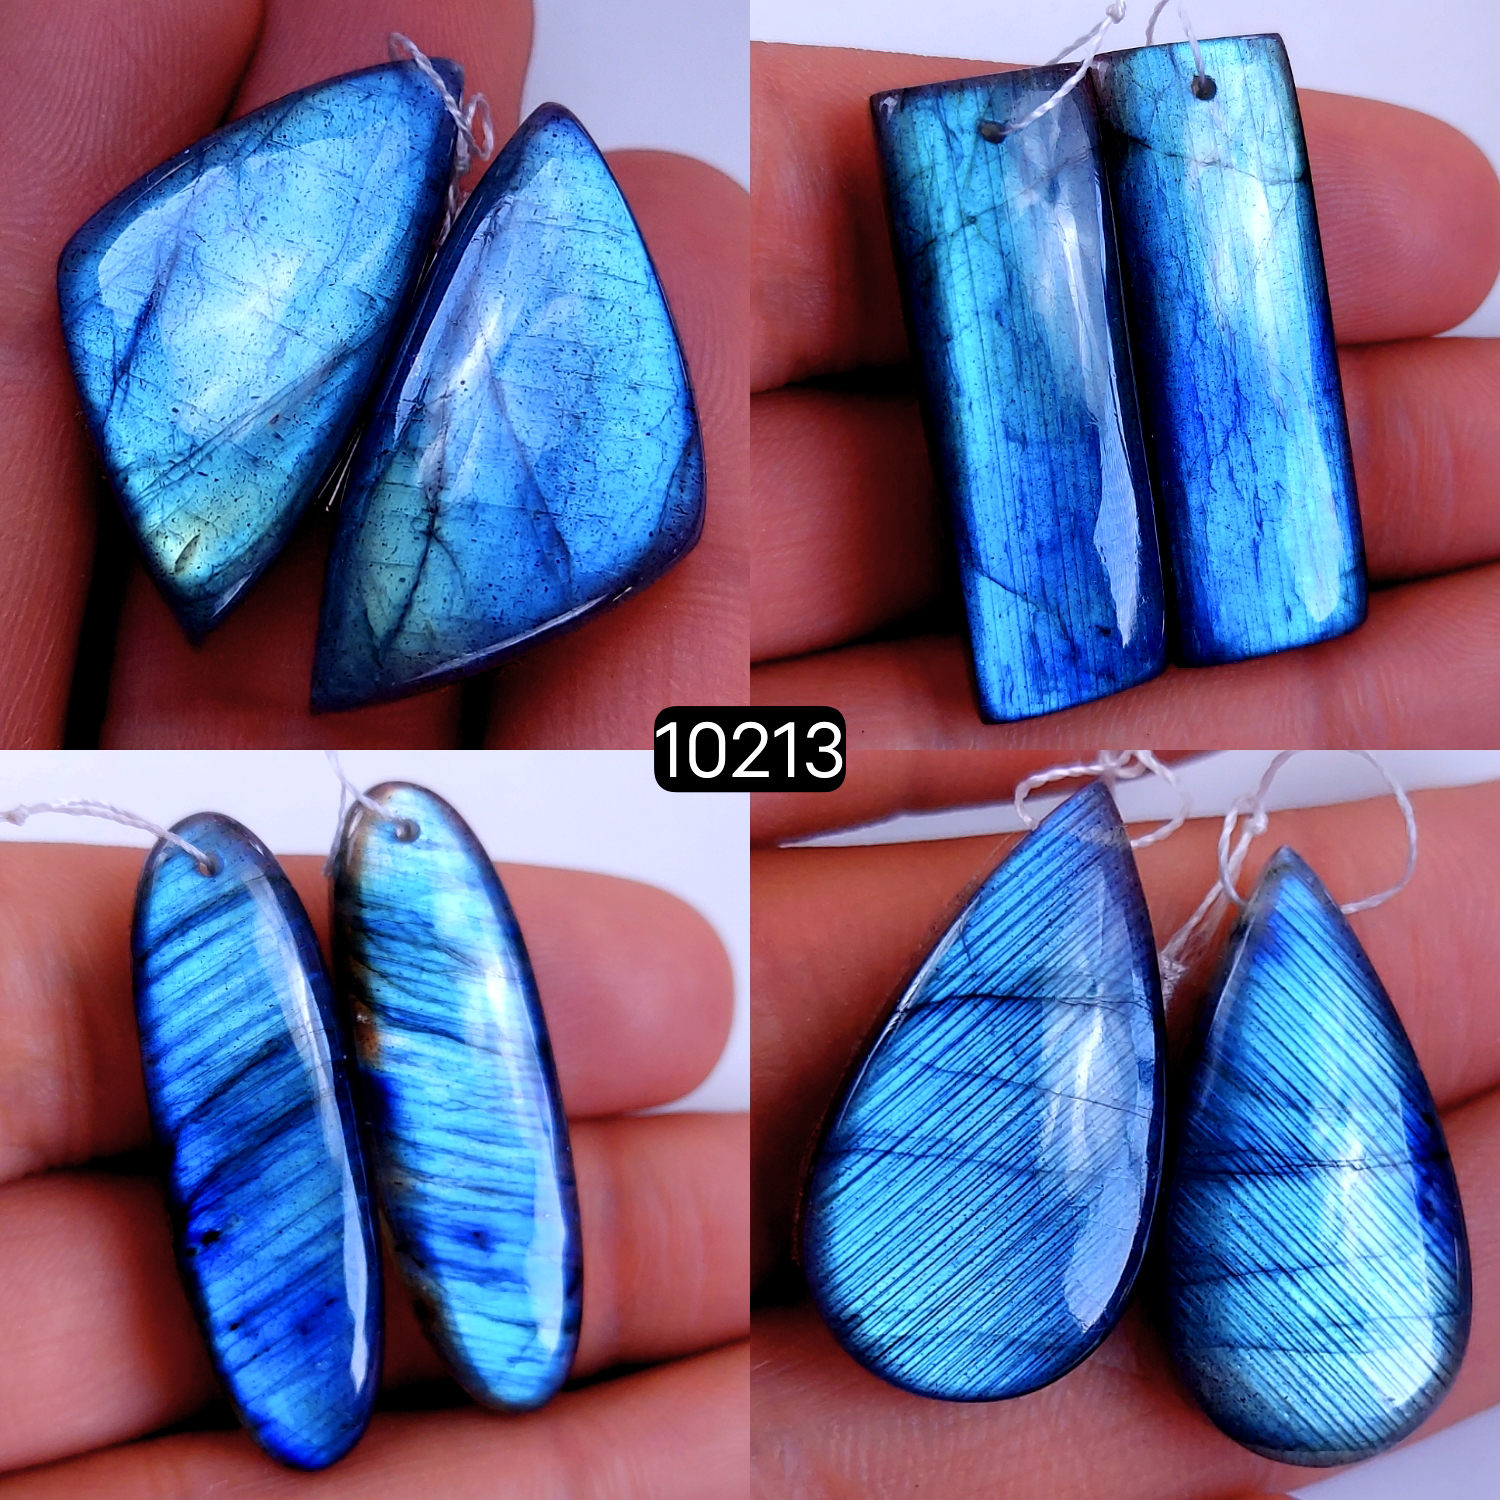 4Pair 183Cts Natural Labradorite Crystal Drill Dangle Drop Earring Pairs Silver Earrings Blue Labradorite Hoop Jewelry  40x12 26x15mm #10213